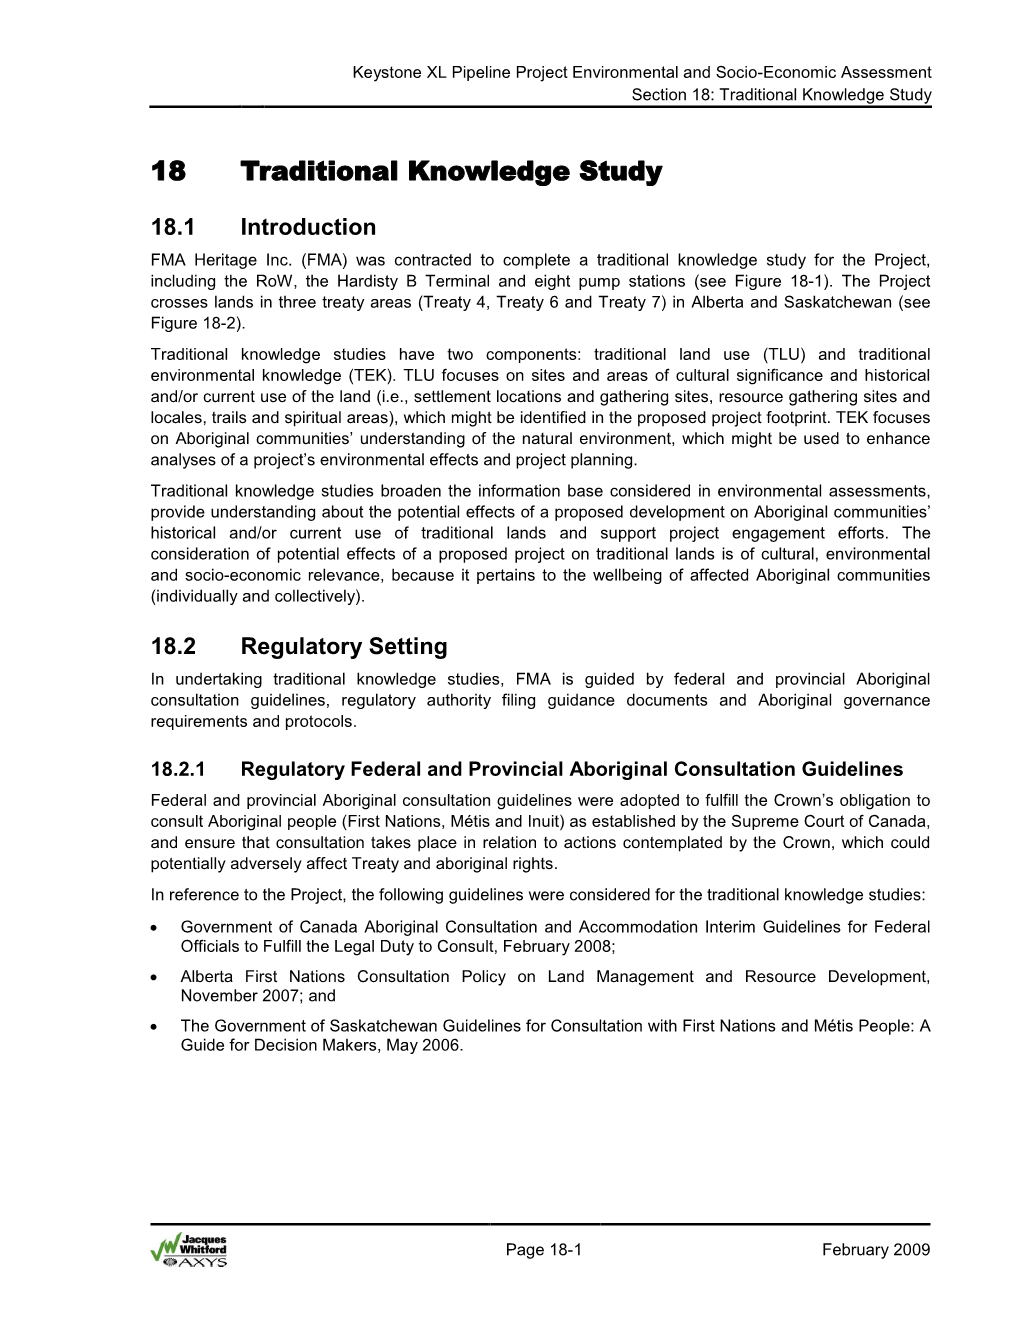 18 Traditional Knowledge Study